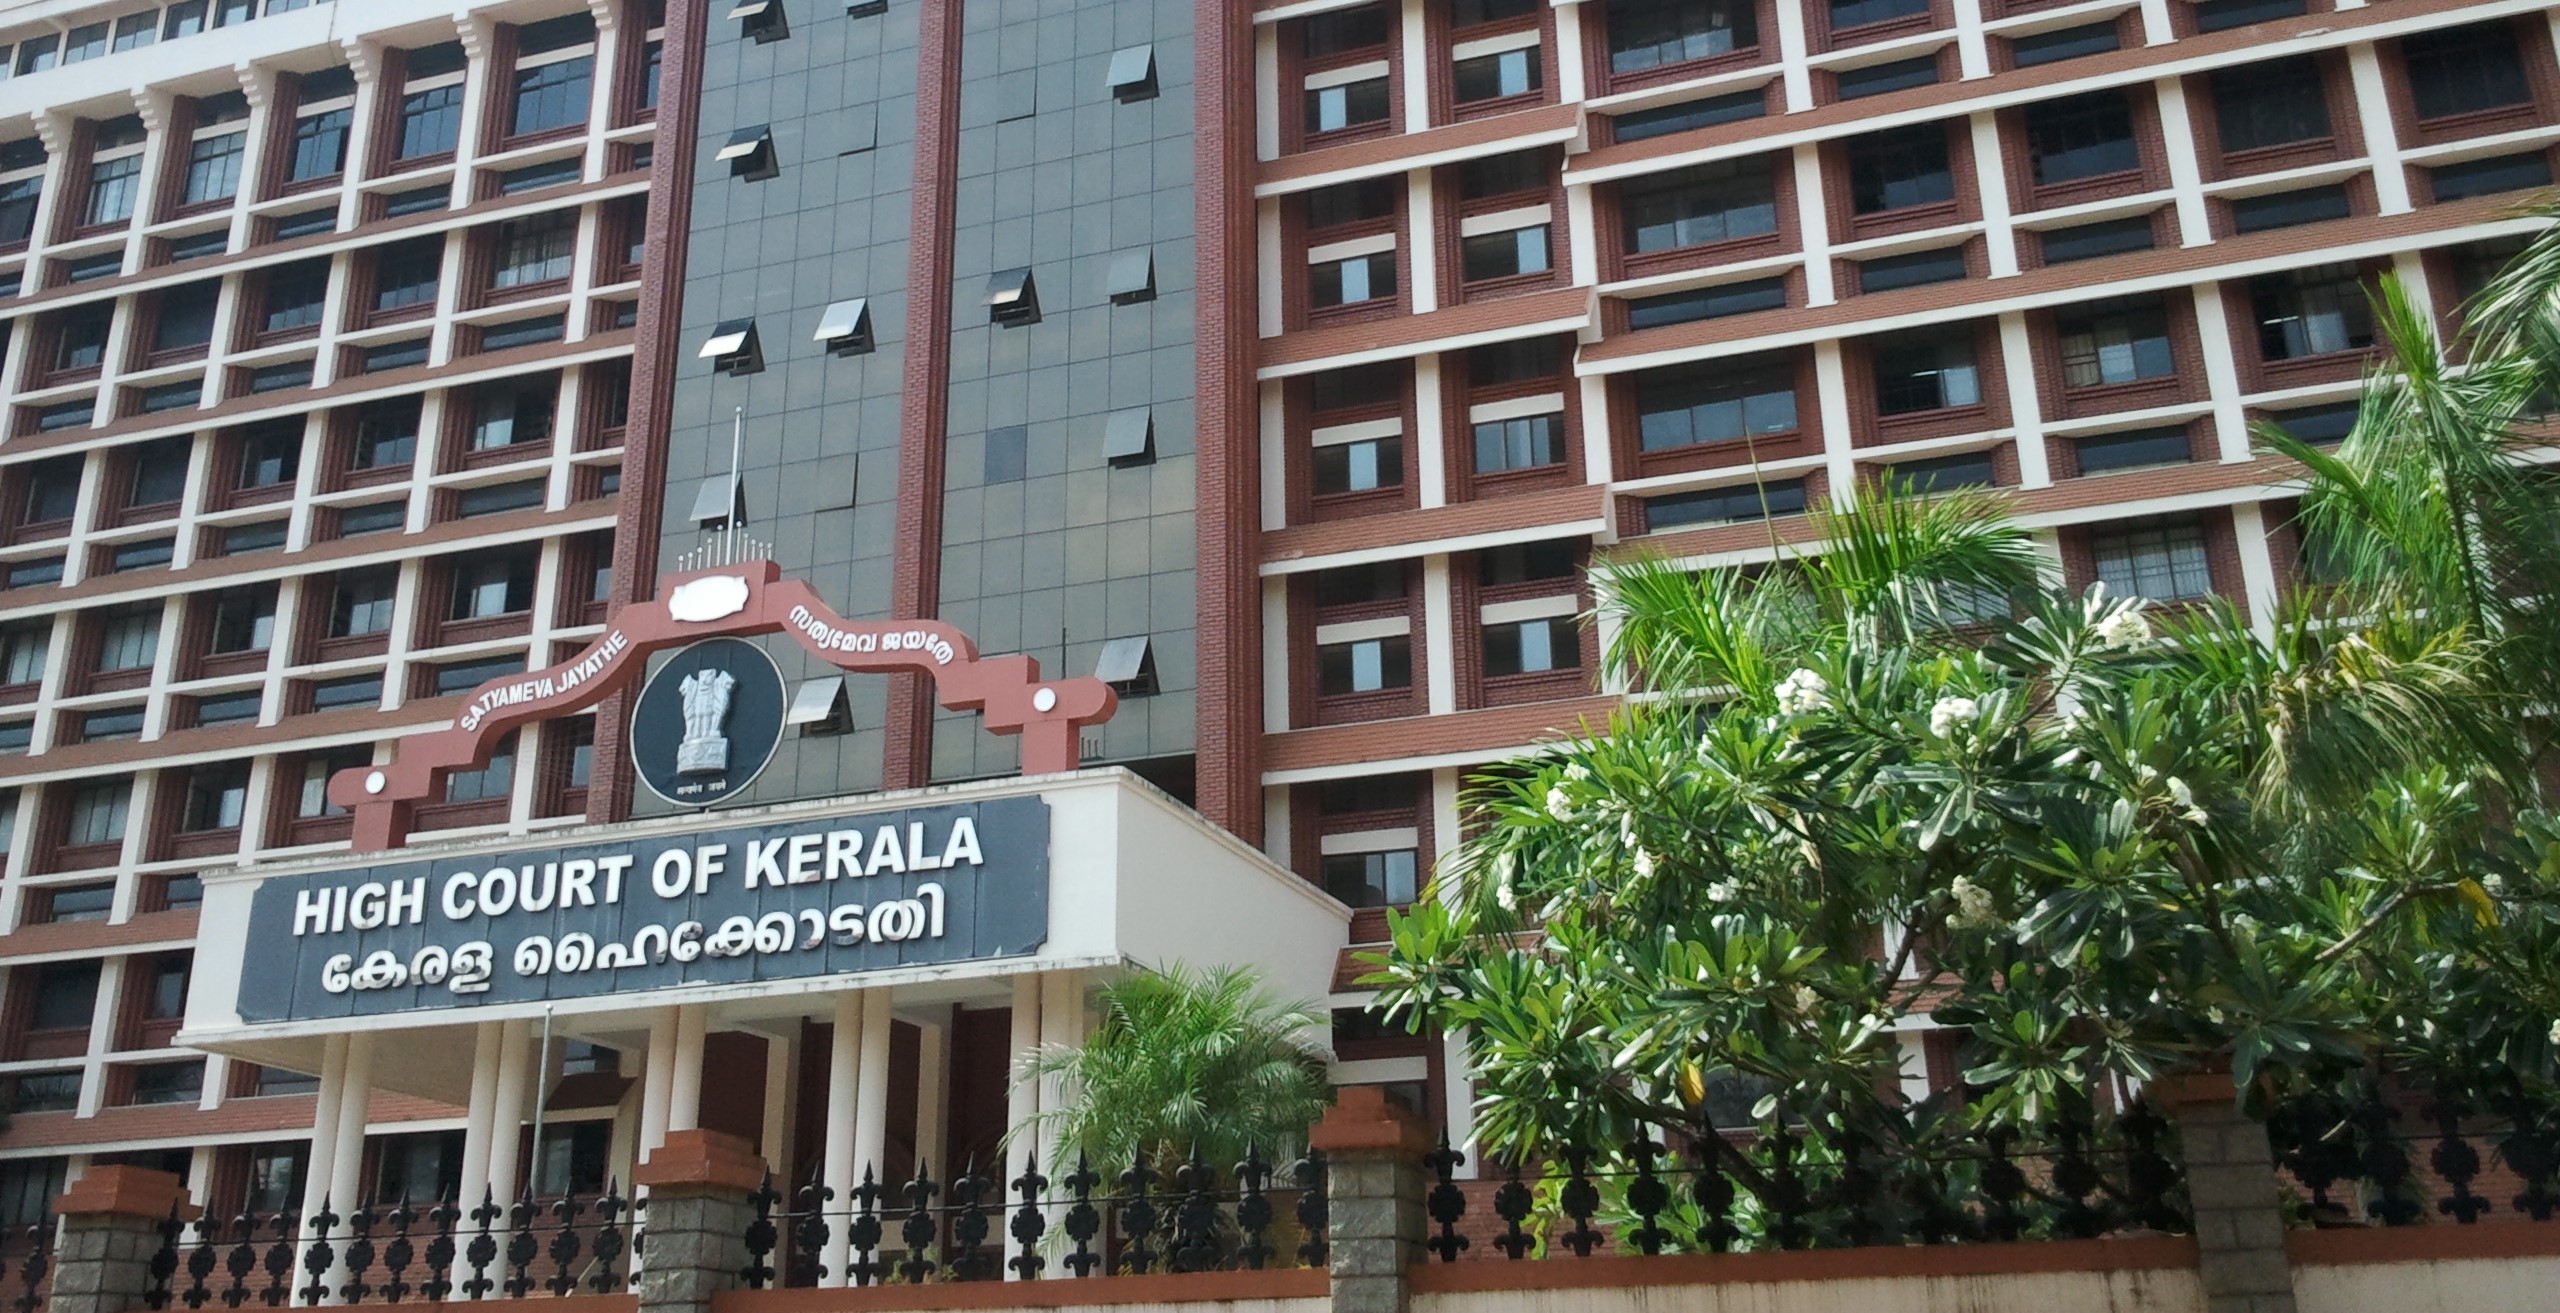 What will state do to assuage girl accused of theft by woman pink police officer: Kerala HC